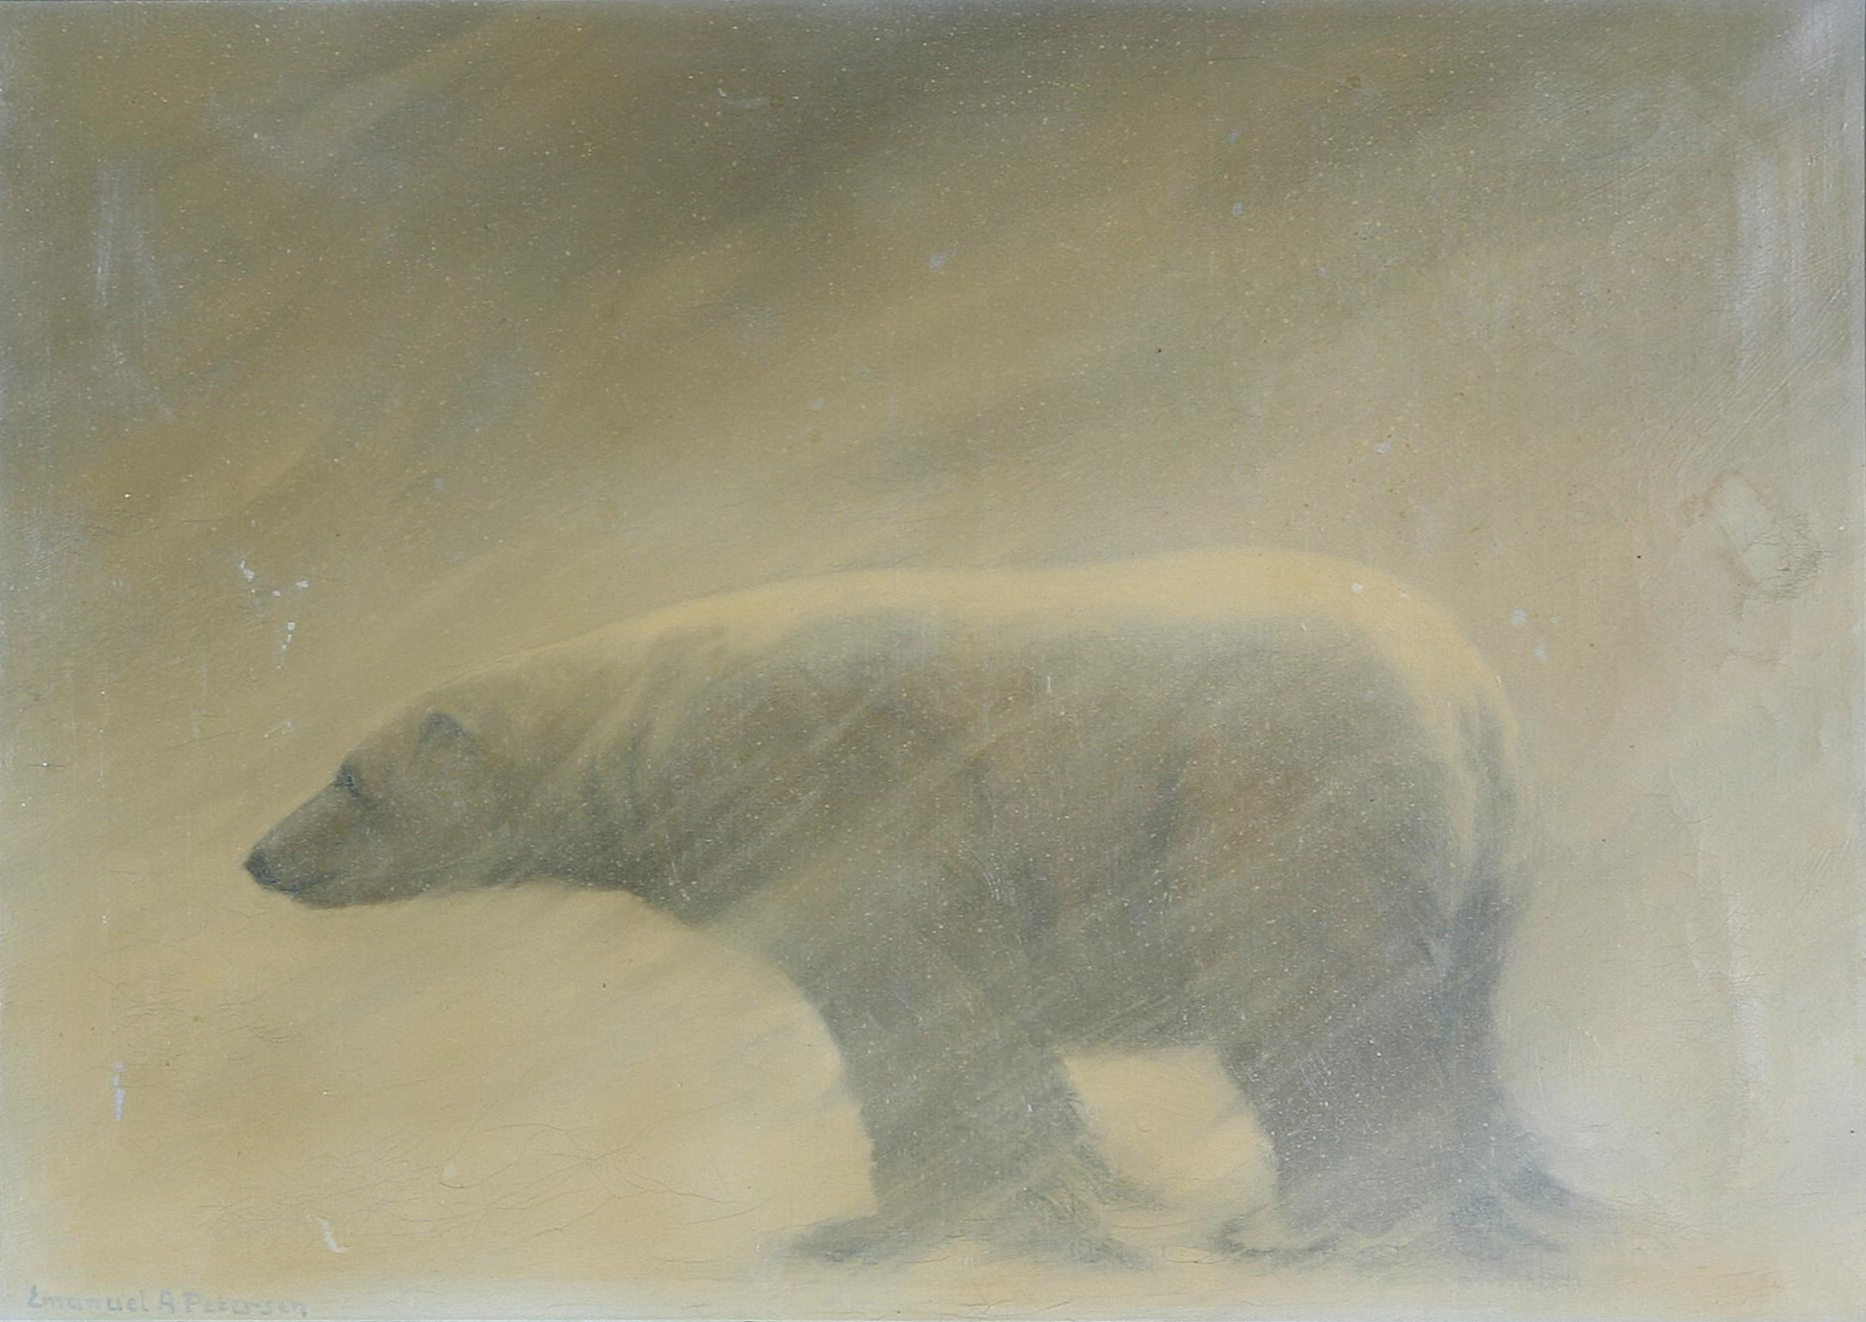 A sideview of a polar bear standing on all fours amidst a snowstorm